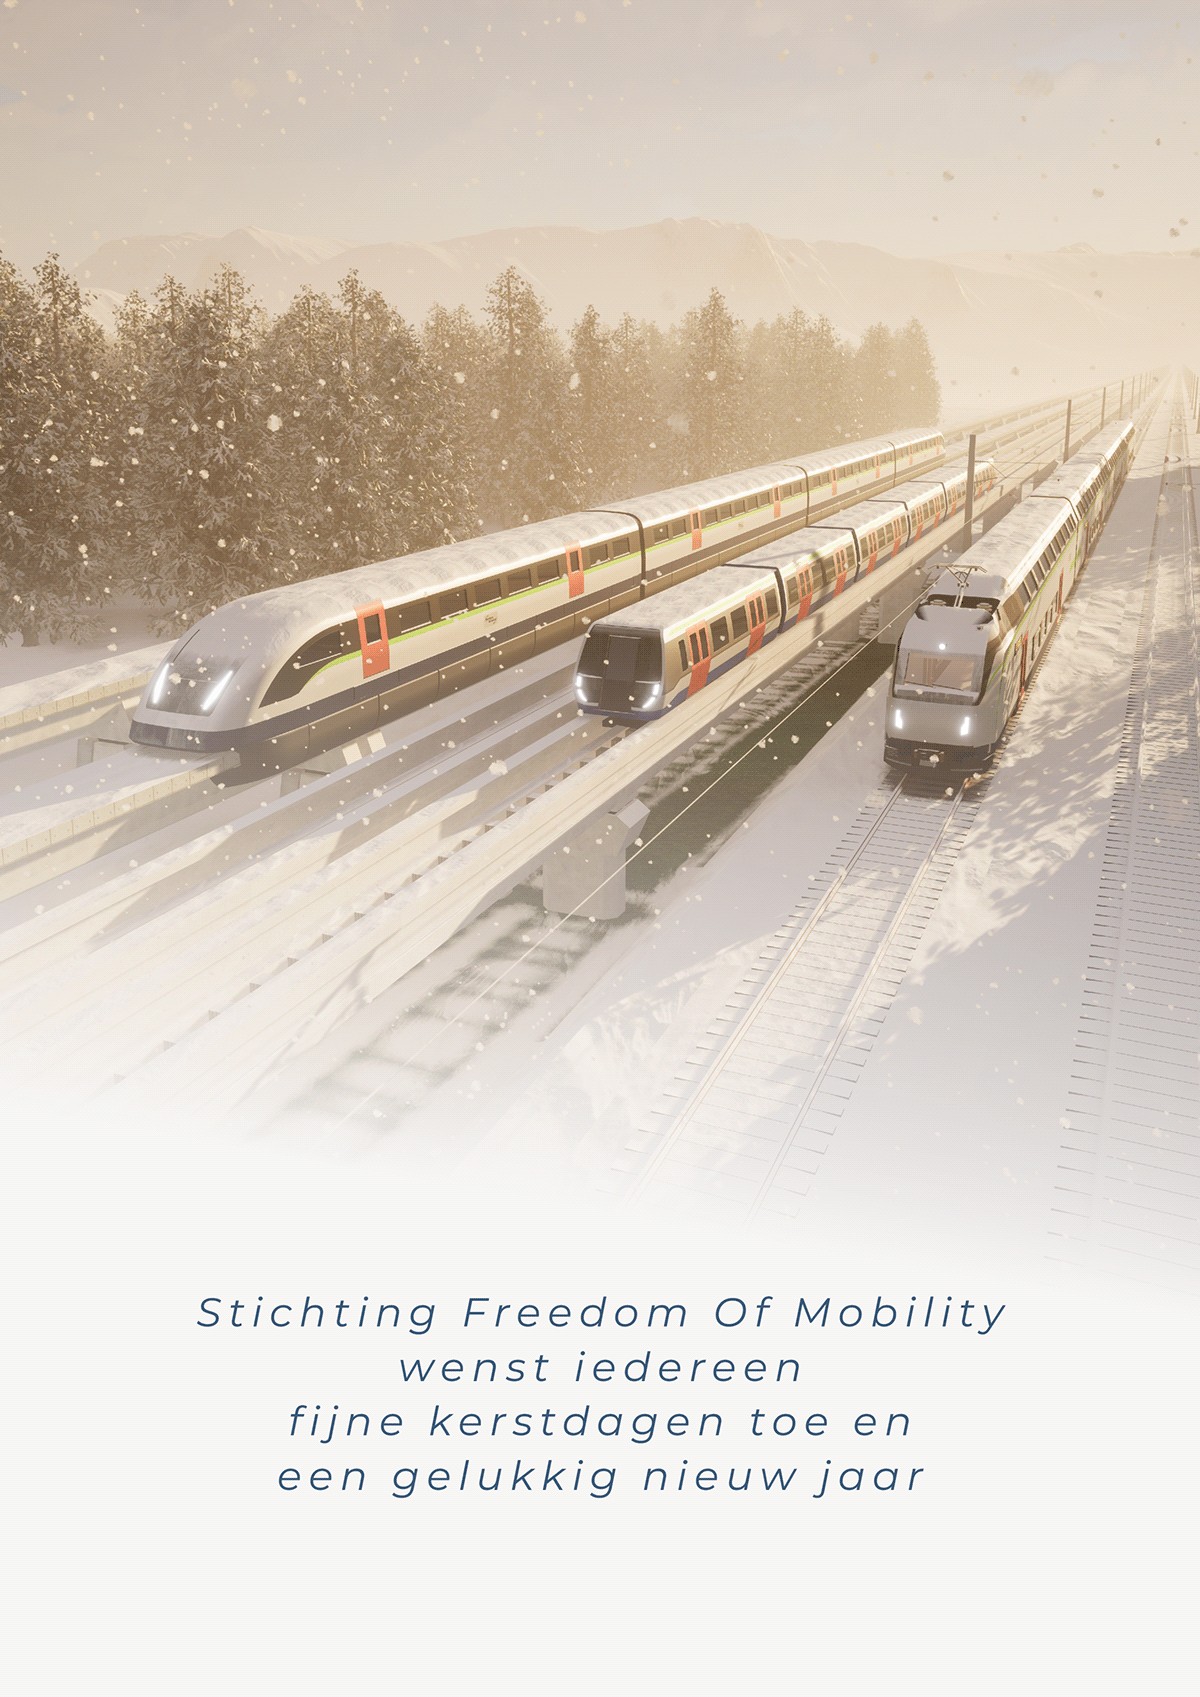 Two maglev trains and one regular train in a snowy landscape in the early morning